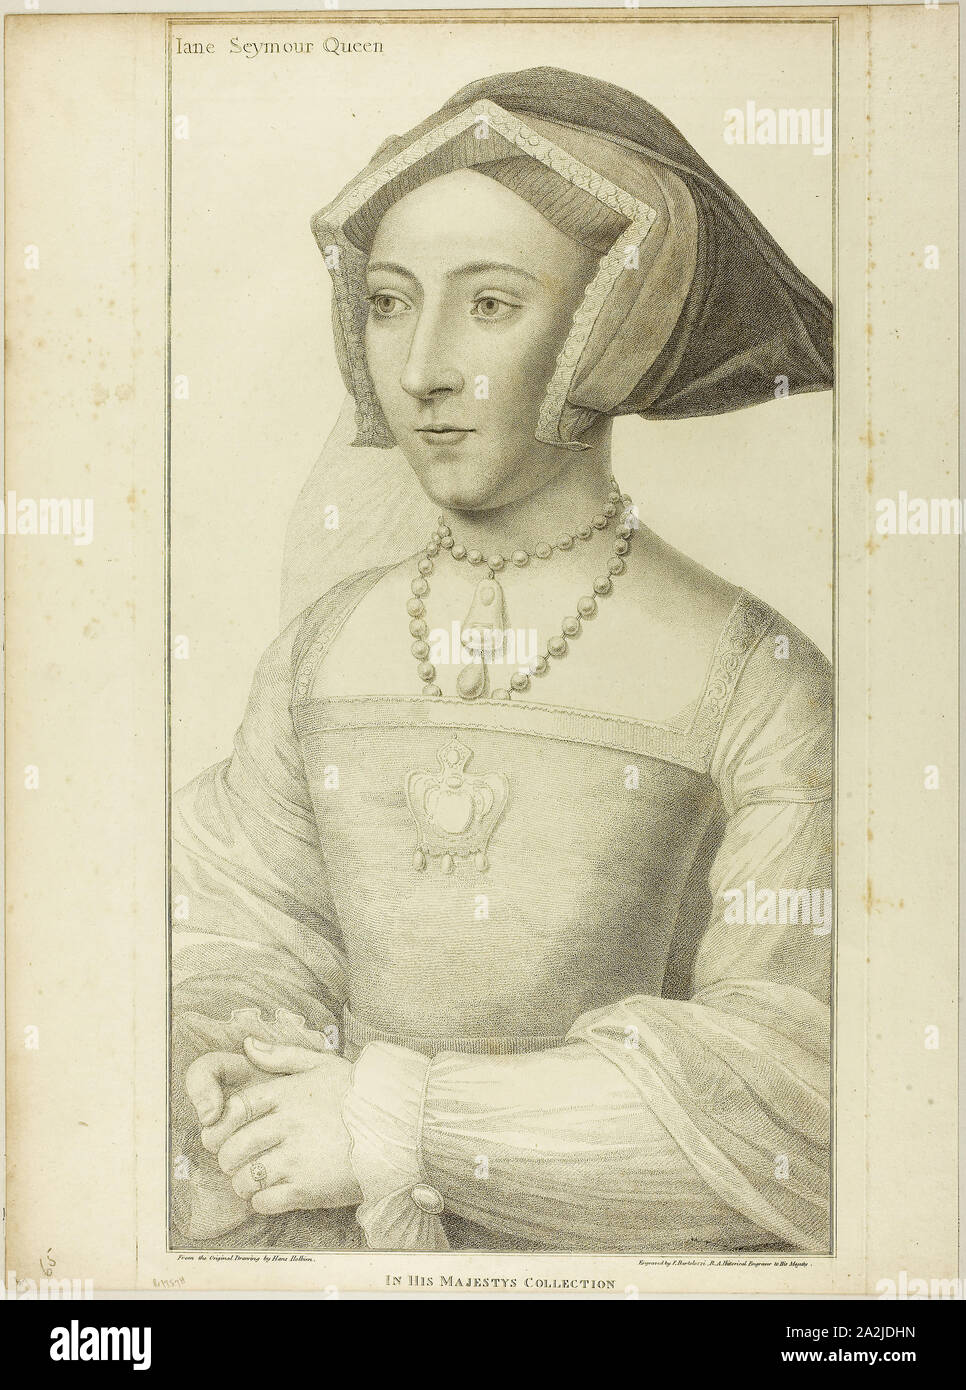 Queen Jane Seymour, March 26, 1795, Francesco Bartolozzi (Italian, 1727-1815), after Hans Holbein the younger (German, 1497-1543), Italy, Stipple engraving on cream wove paper, 521 x 283 mm (image), 540 x 310 mm (plate), 540 x 401(sheet Stock Photo